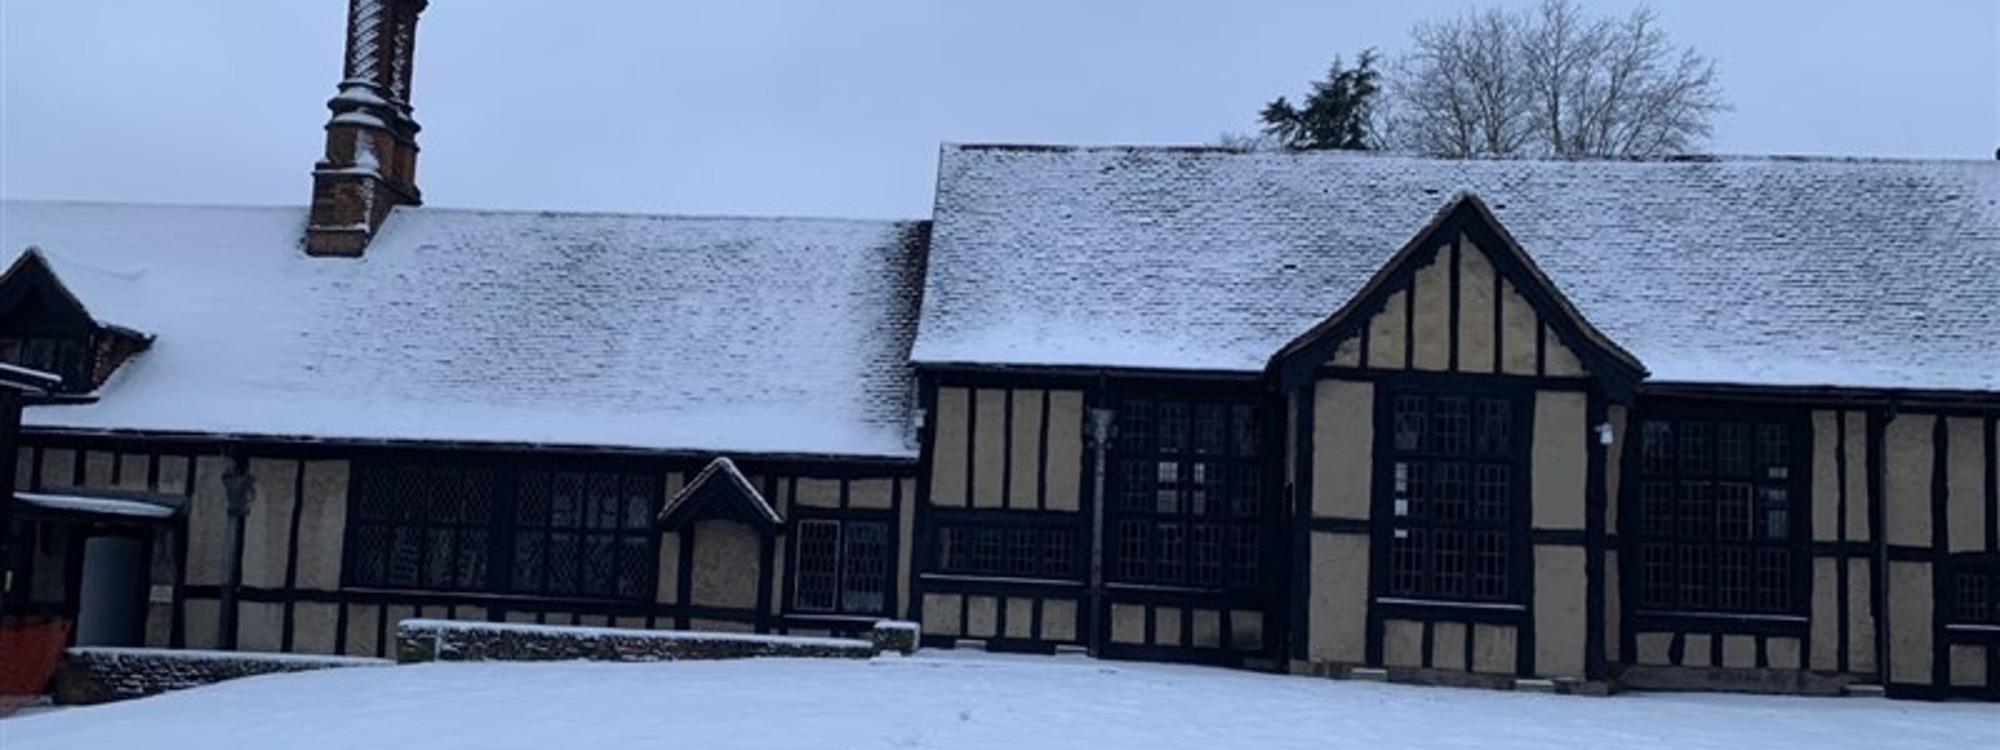 Church House in the snow